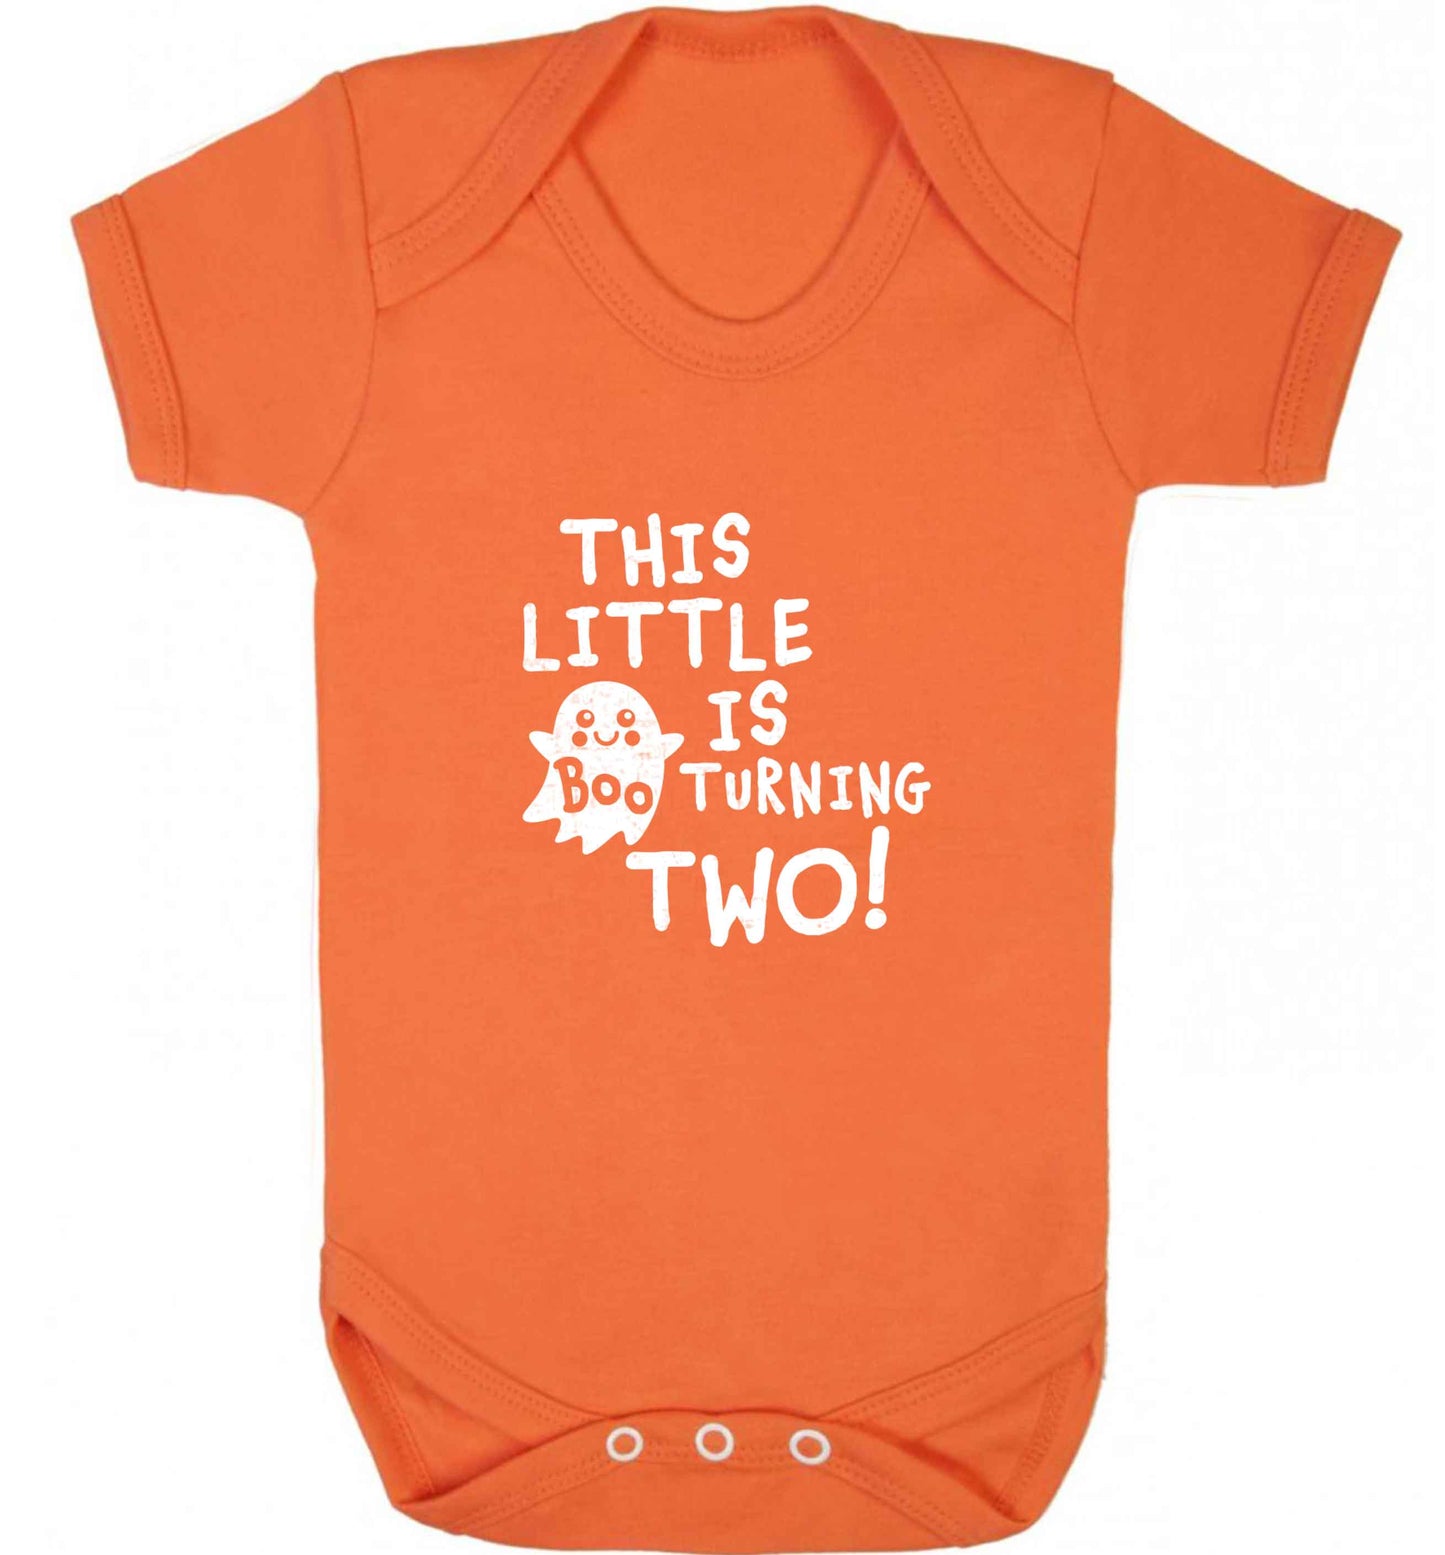 This little boo is turning two baby vest orange 18-24 months